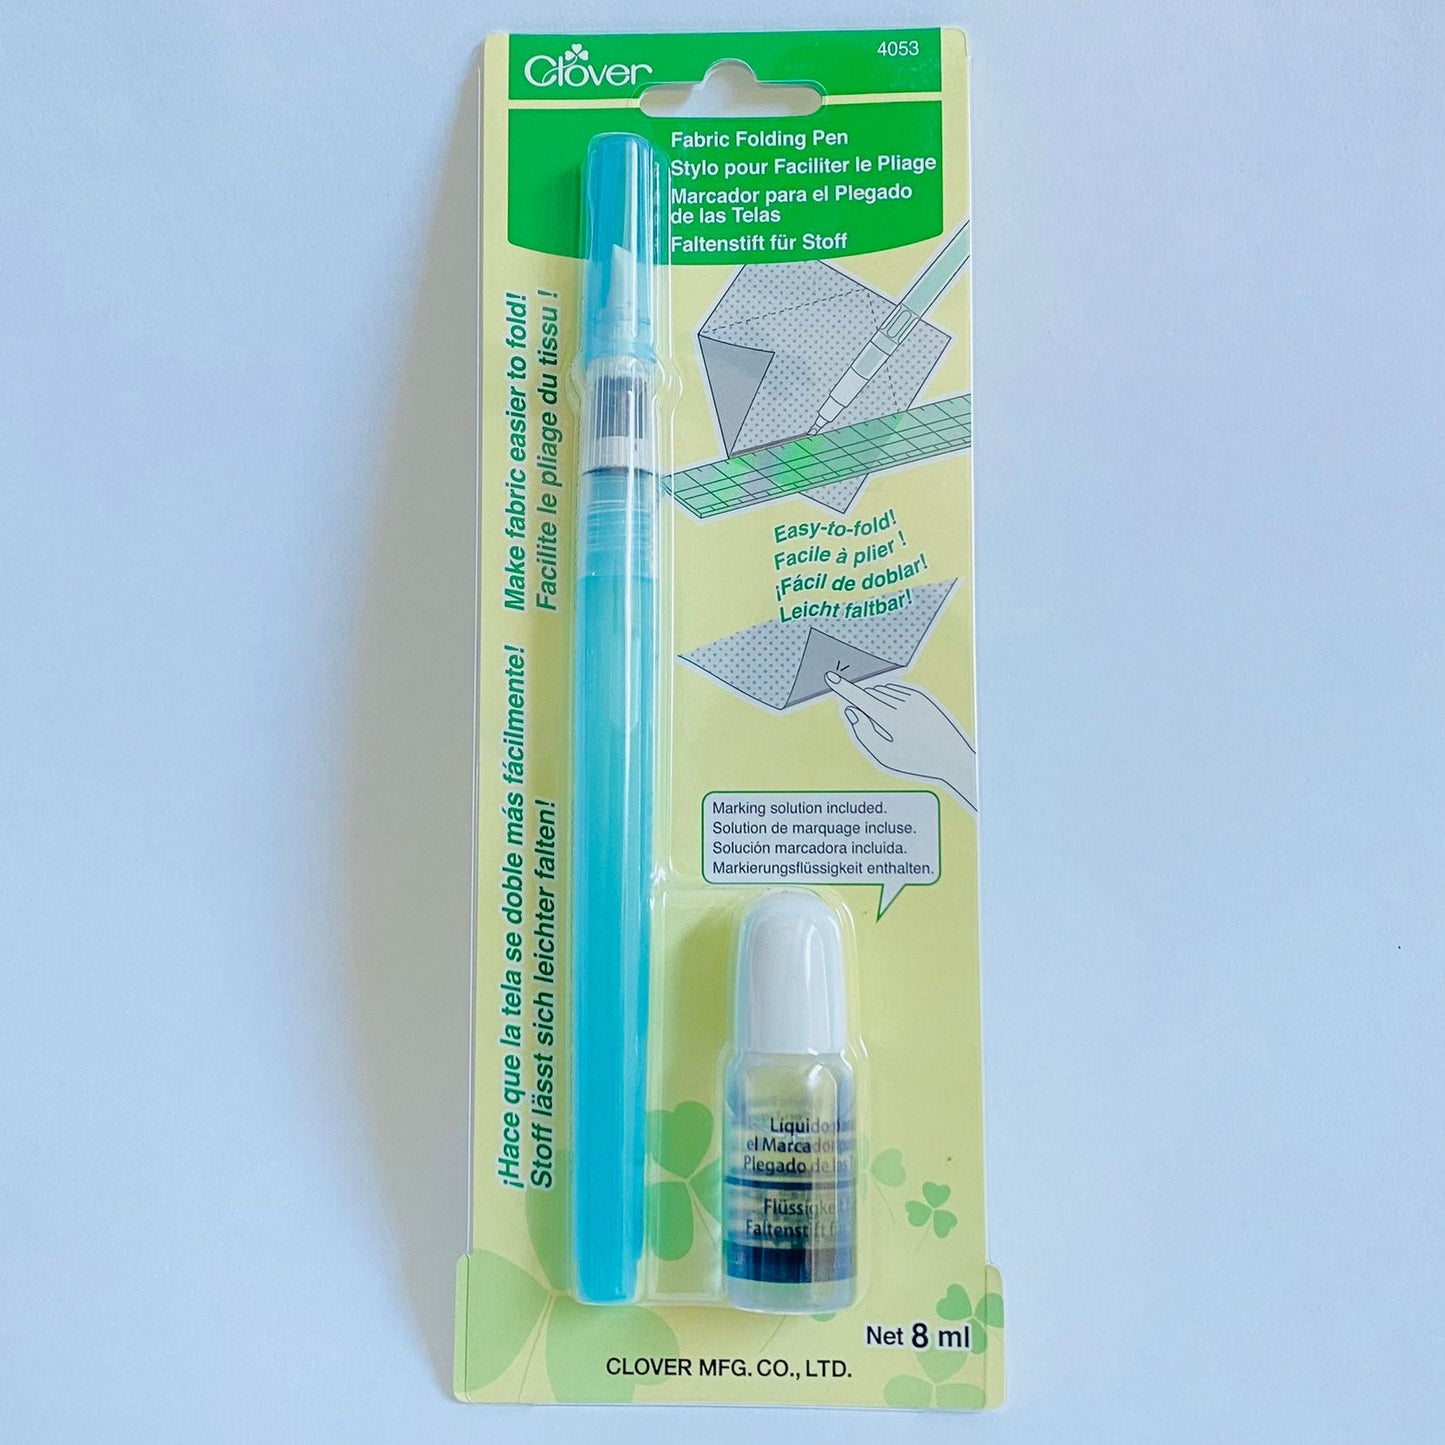 The Fabric Folding Pen by Clover in the package with special applicator tip comes with a small bottle of solution. The applicator tip dispenses the diluted solution in a fine or heavy line and makes fabric easier to fold. Use for finger pressing seams, English paper piecing, foundation or paper piecing, and more.